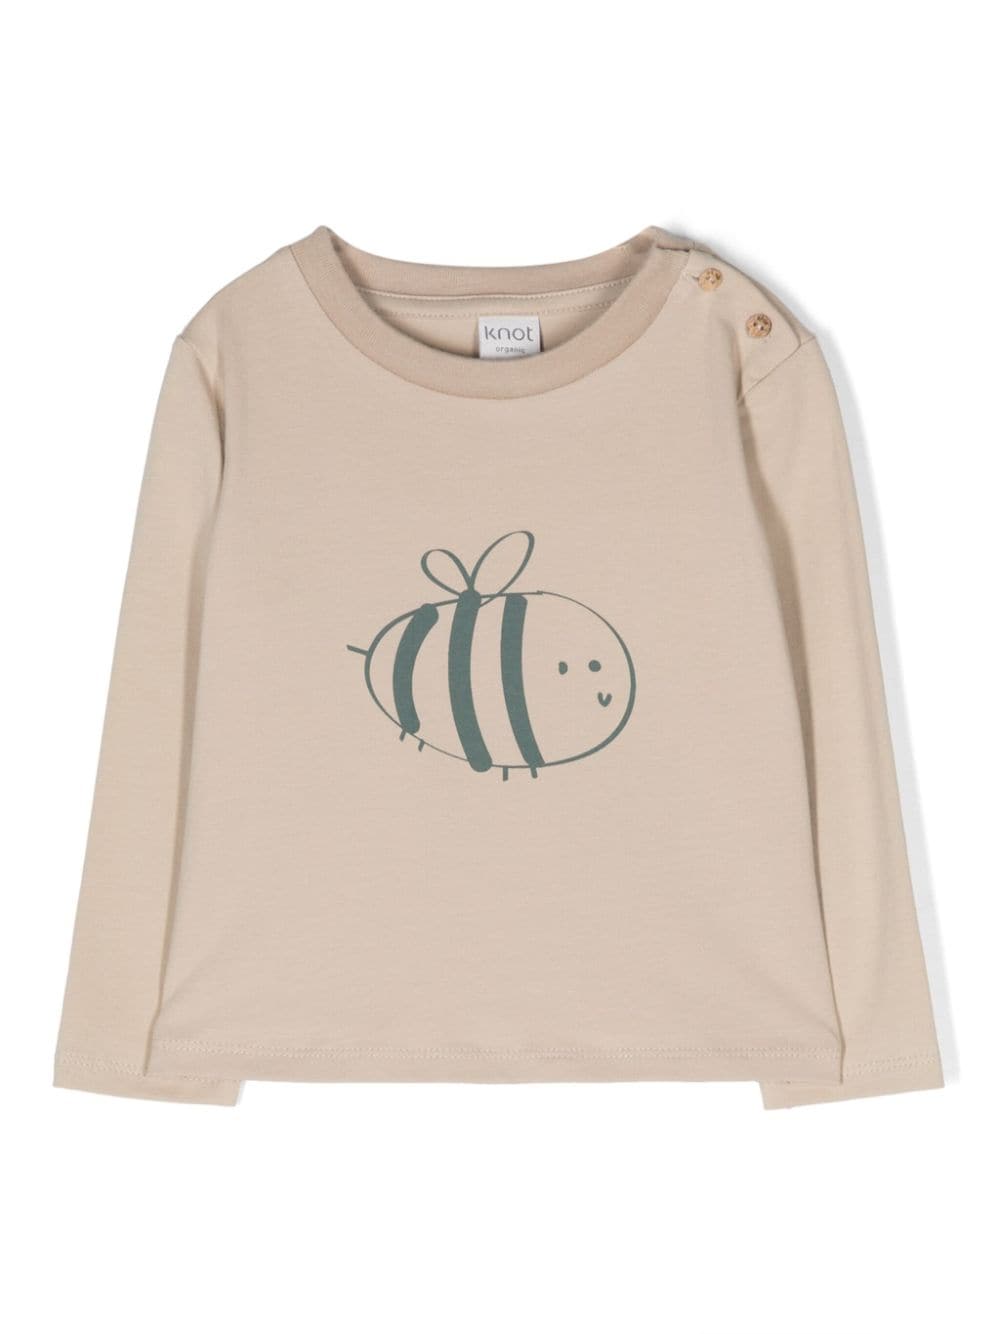 Knot Bee T-Shirt - Nude von Knot